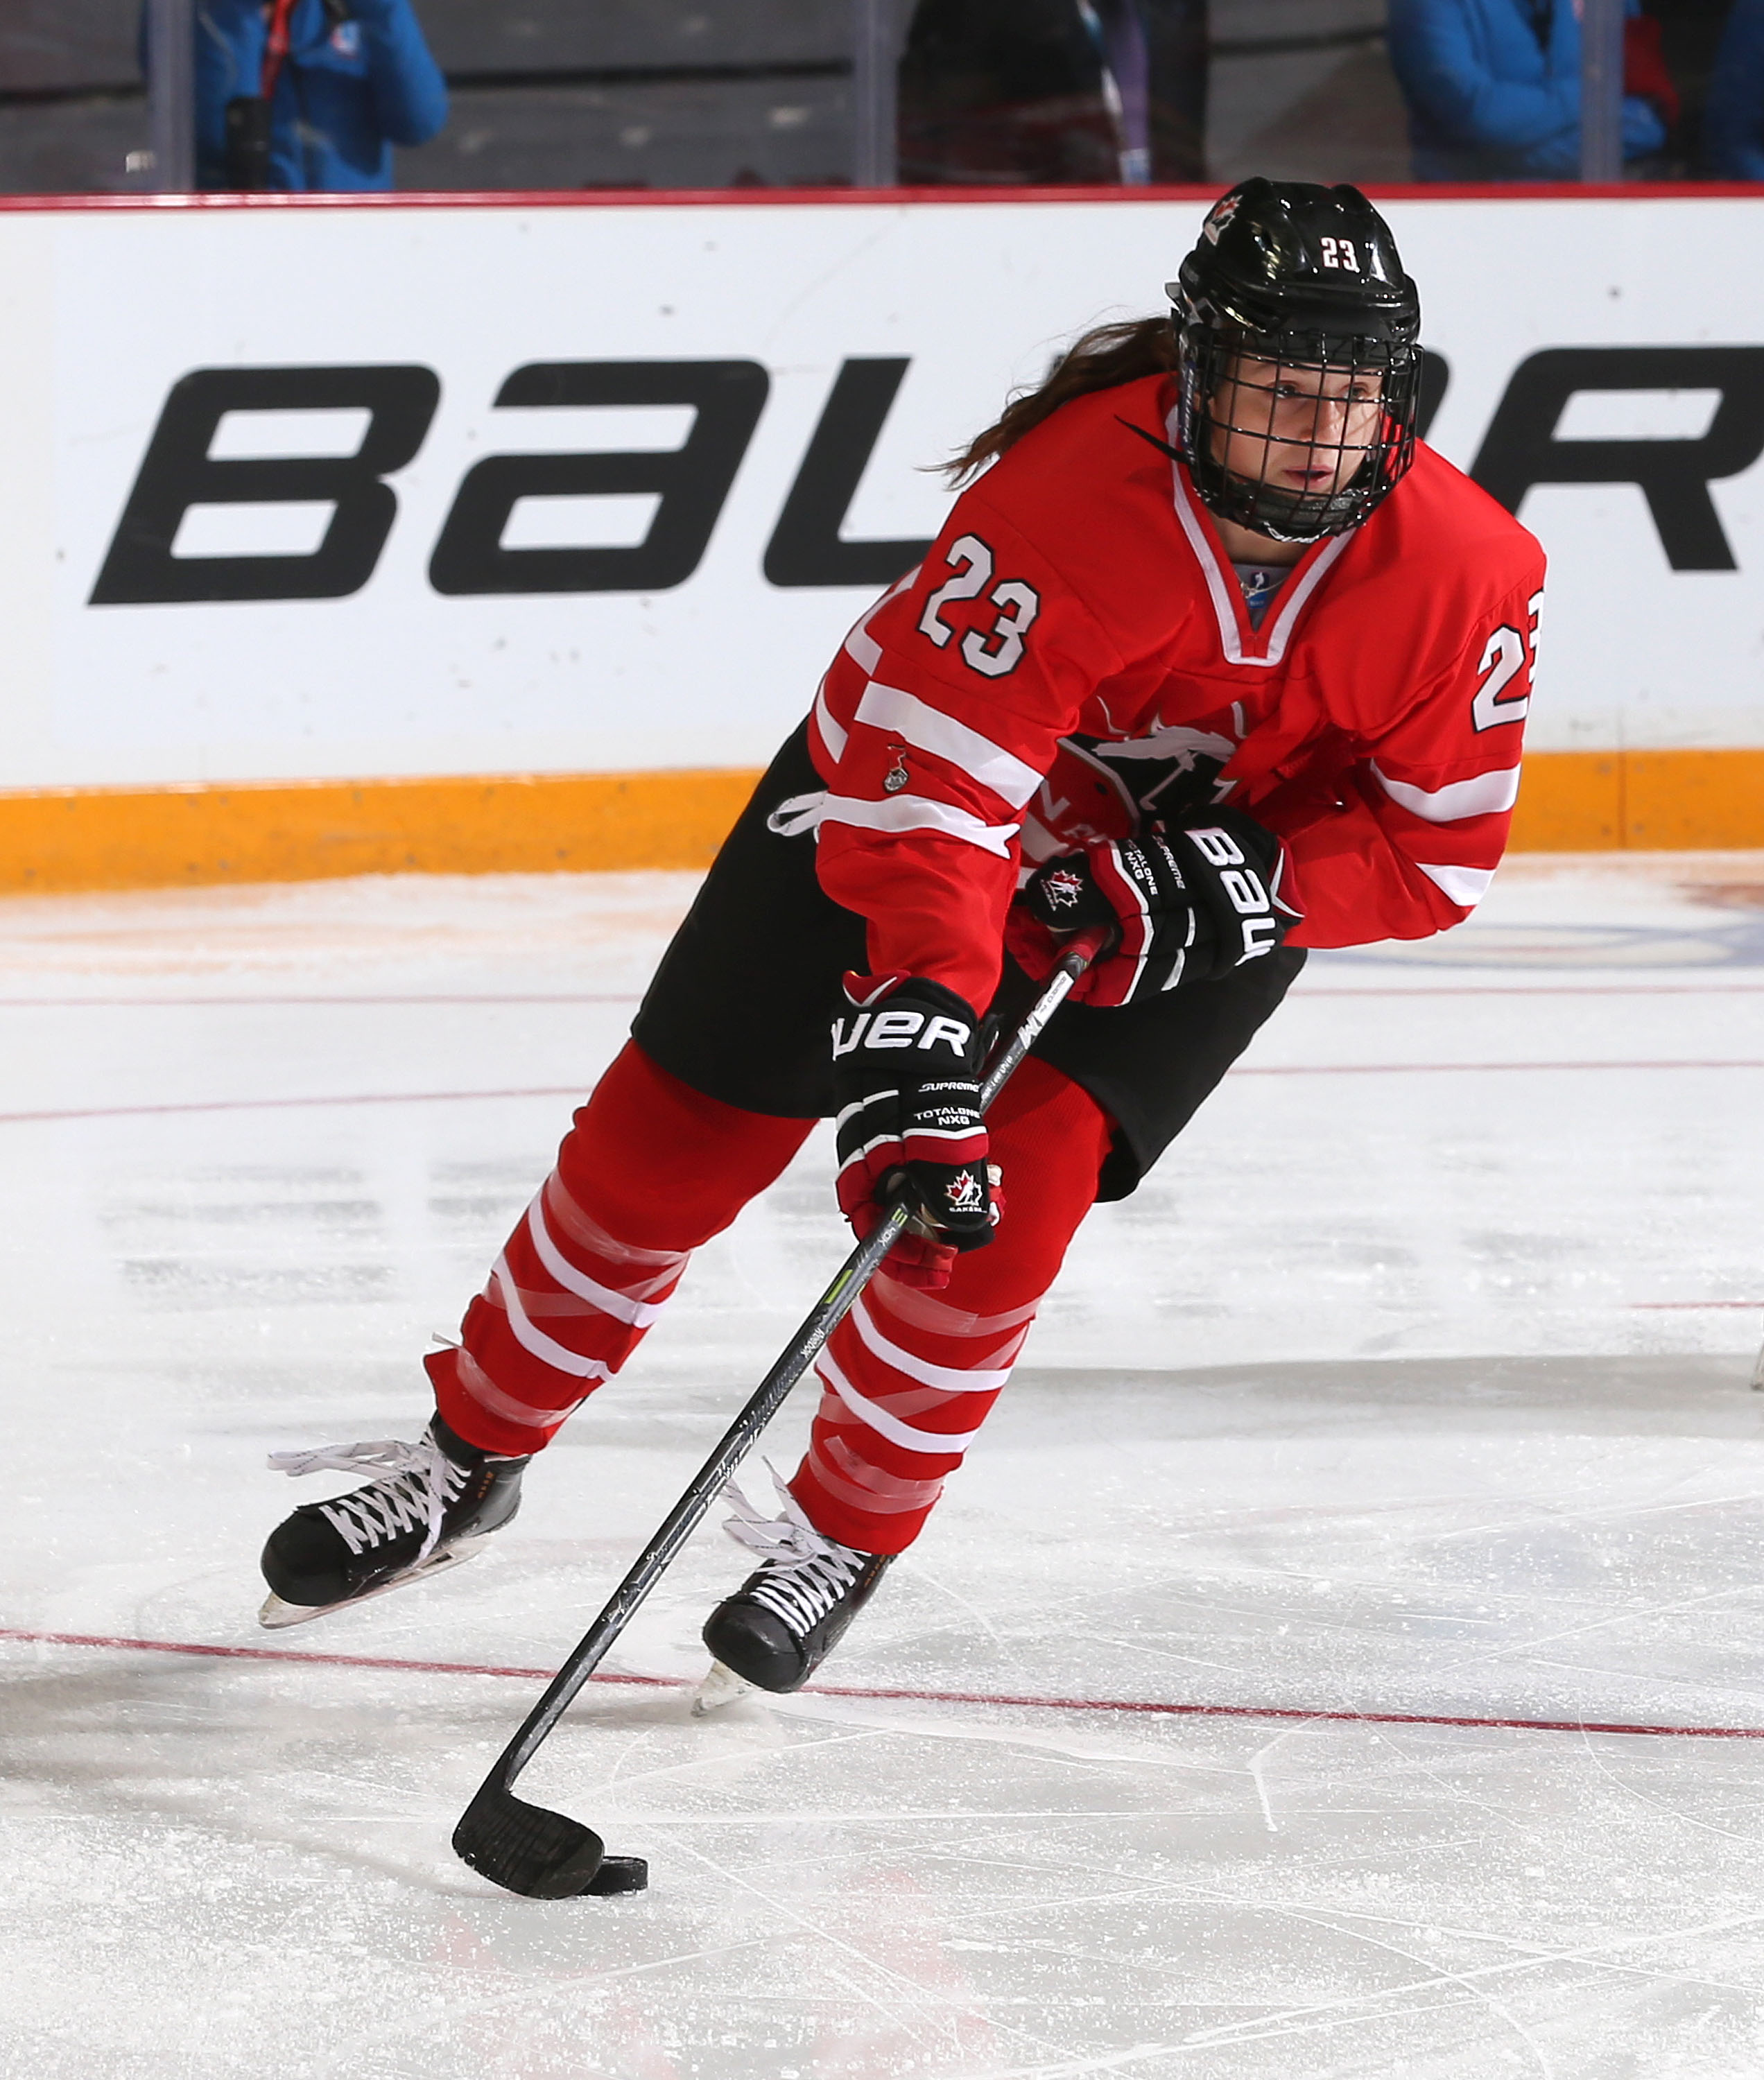 Beamsville's Annie Berg skates with the puck during one of Canada's games in the 2016 IIHF Ice Hockey U18 Women's World Championship in St. Catharines. Berg will play for the Brock Badgers next year. (Photo by Jana Chytilova/HHOF-IIHF Images)